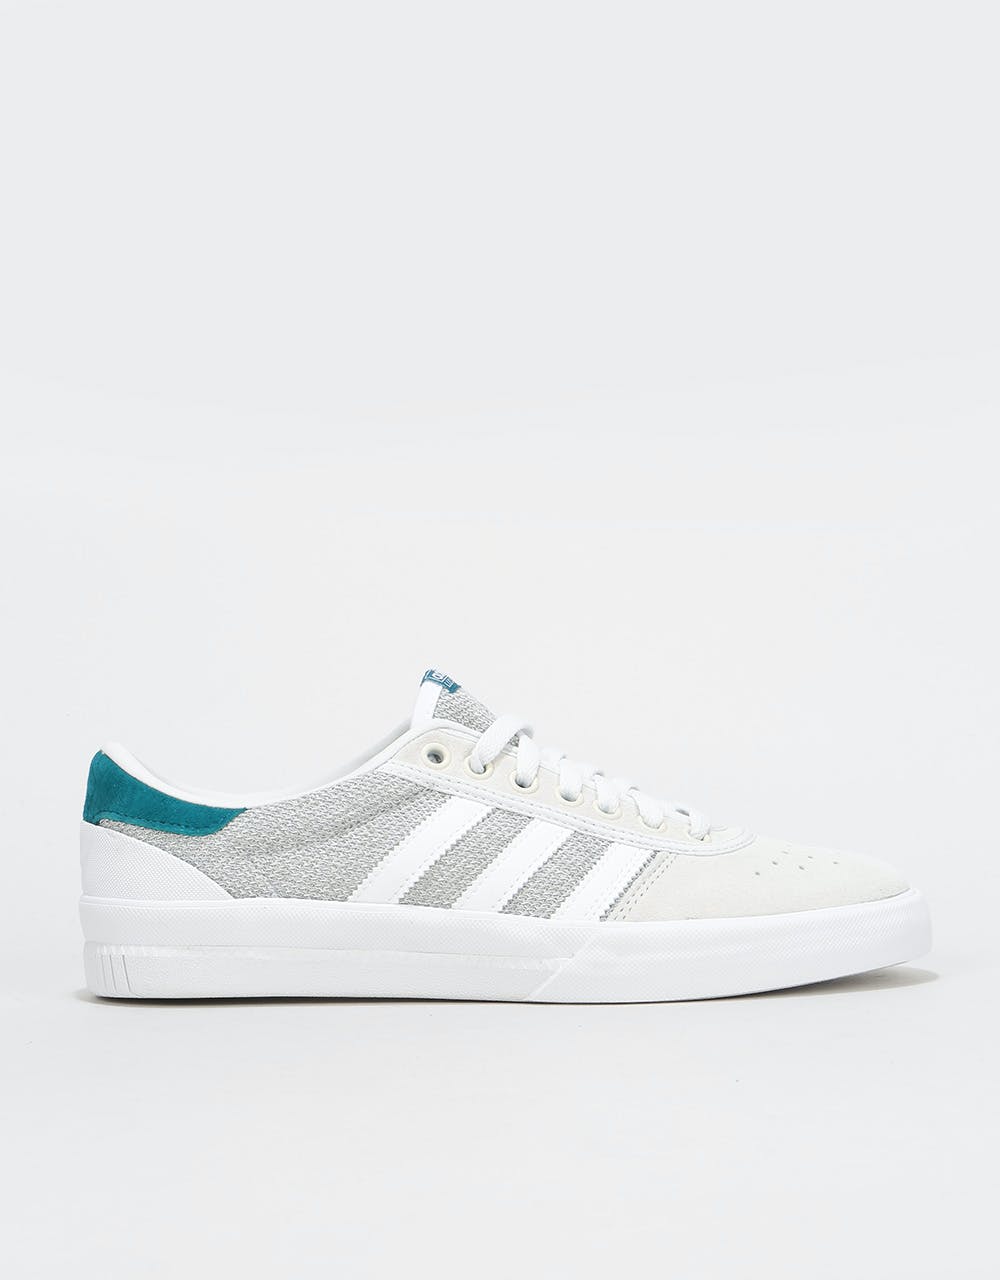 Adidas Lucas Premiere Skate Shoes - White/Solid Grey/Real Teal